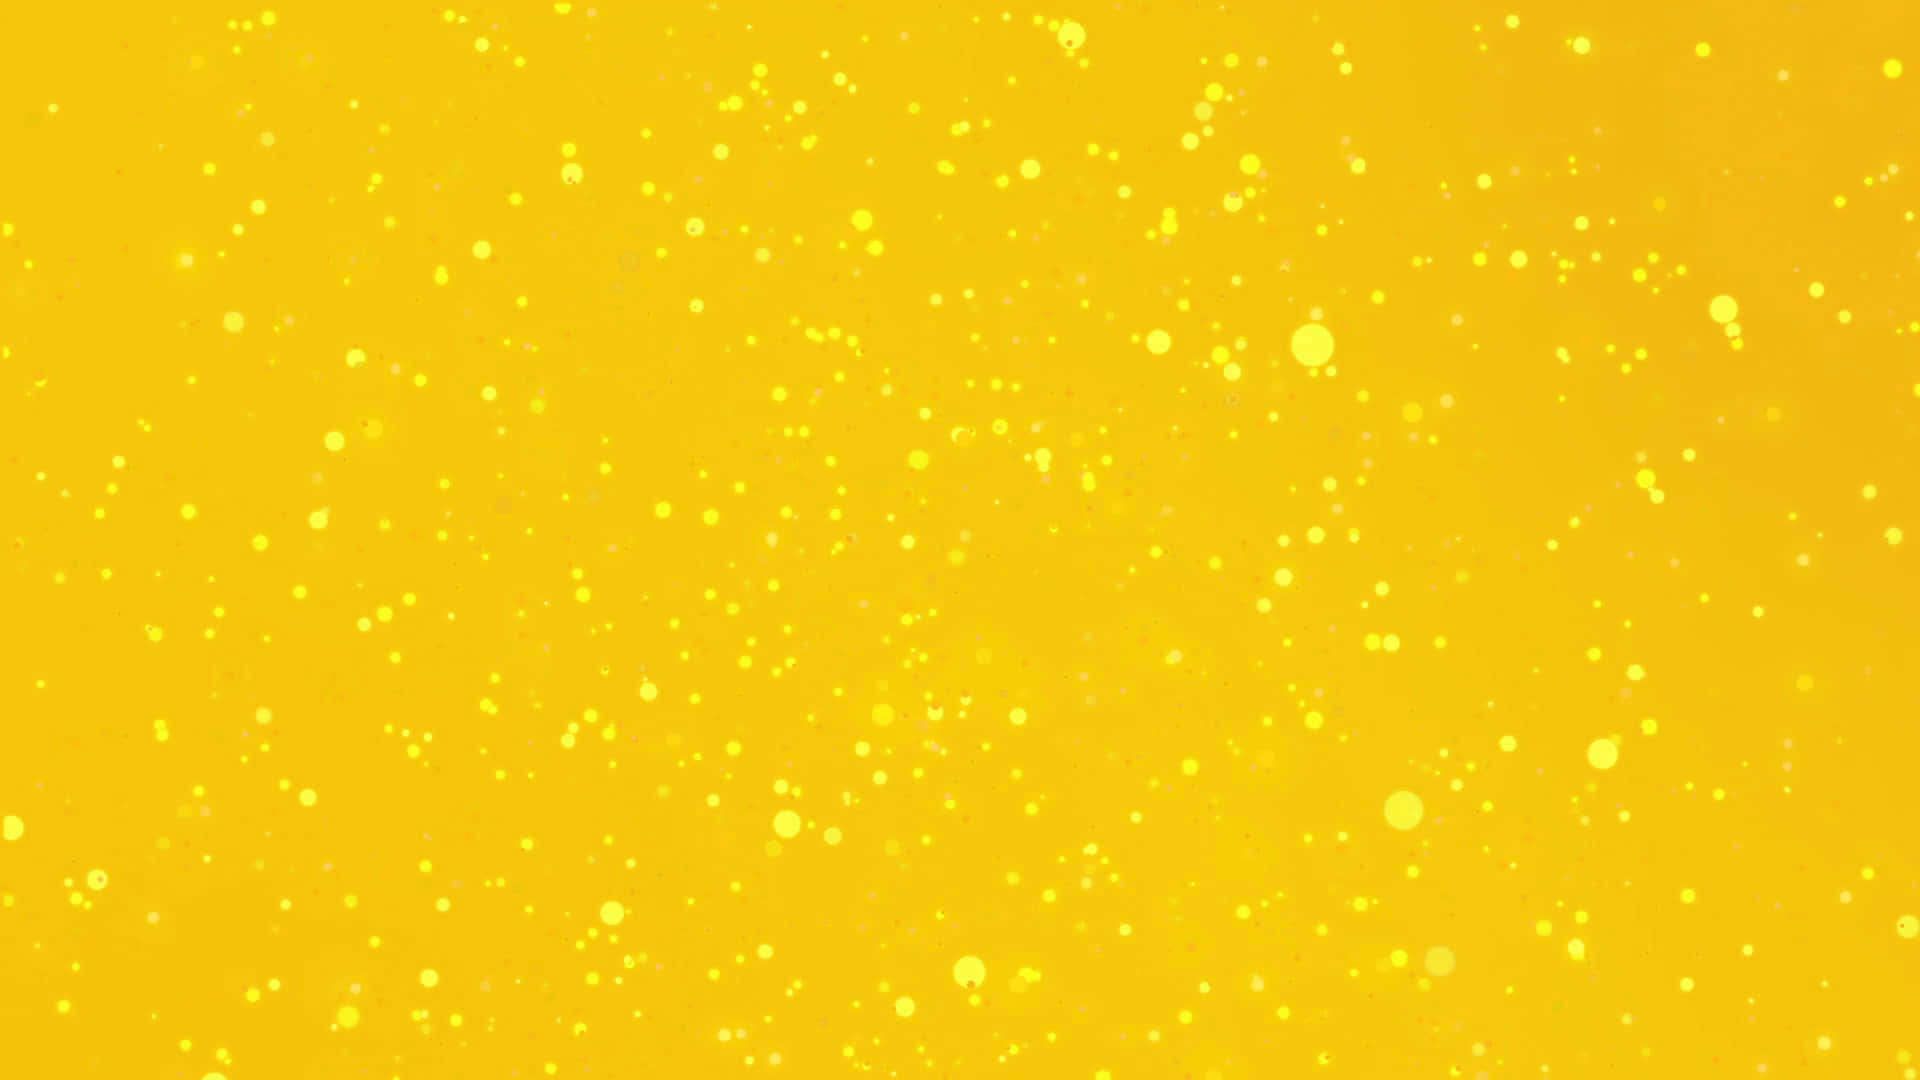 Yellow Background With Drops Of Water Wallpaper